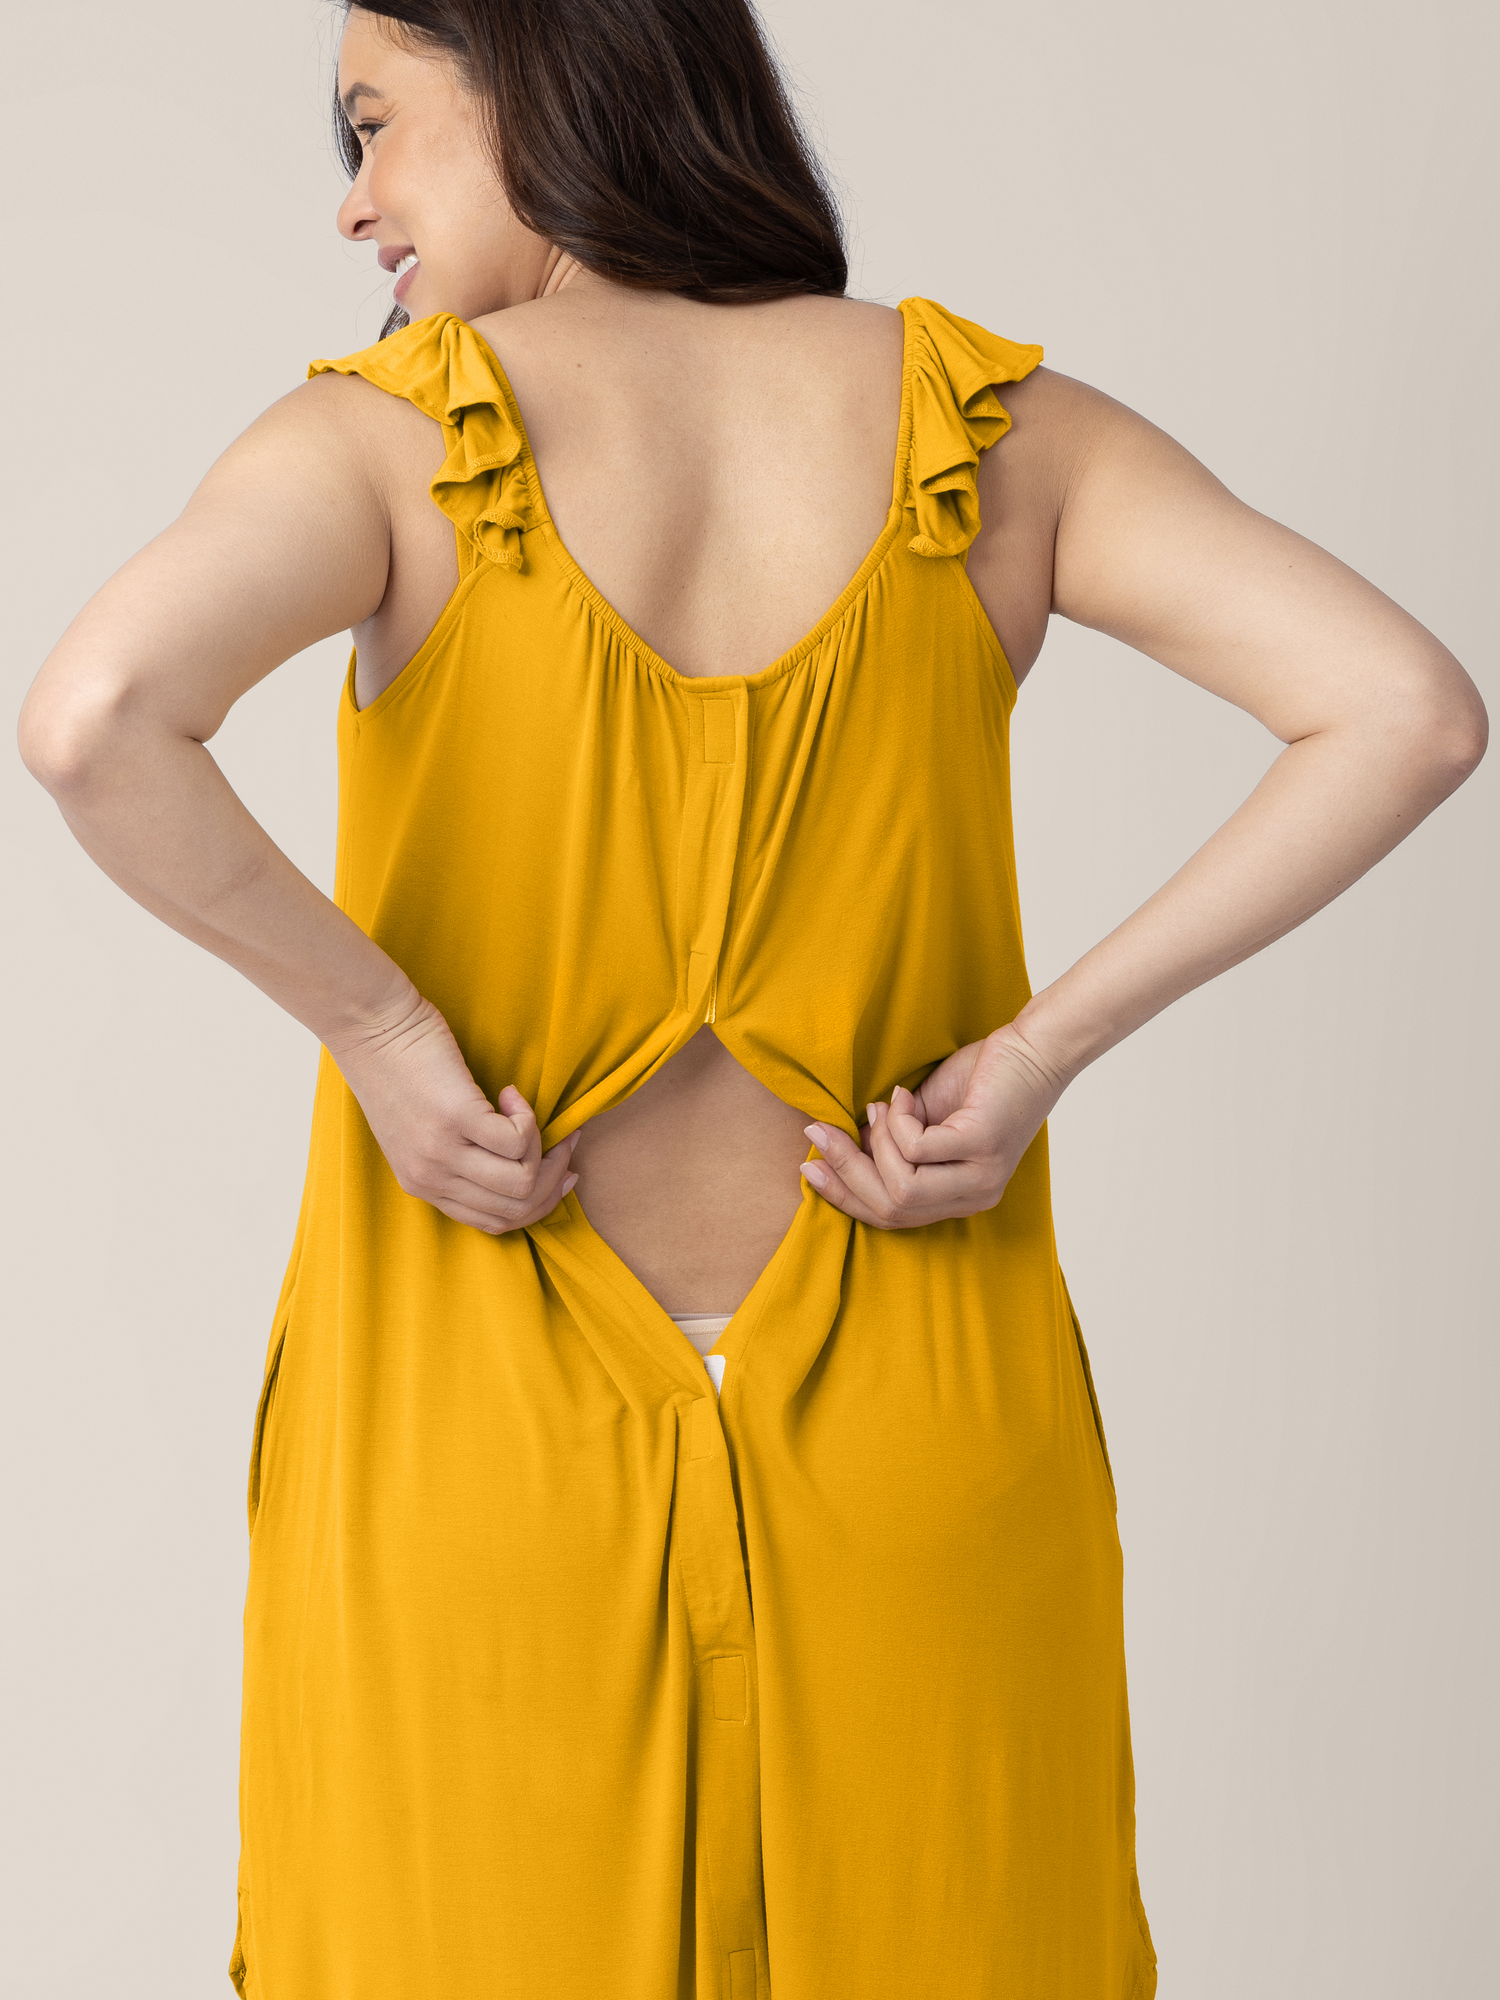 Epidural access on the Ruffle Strap Labor & Delivery Gown in Honey